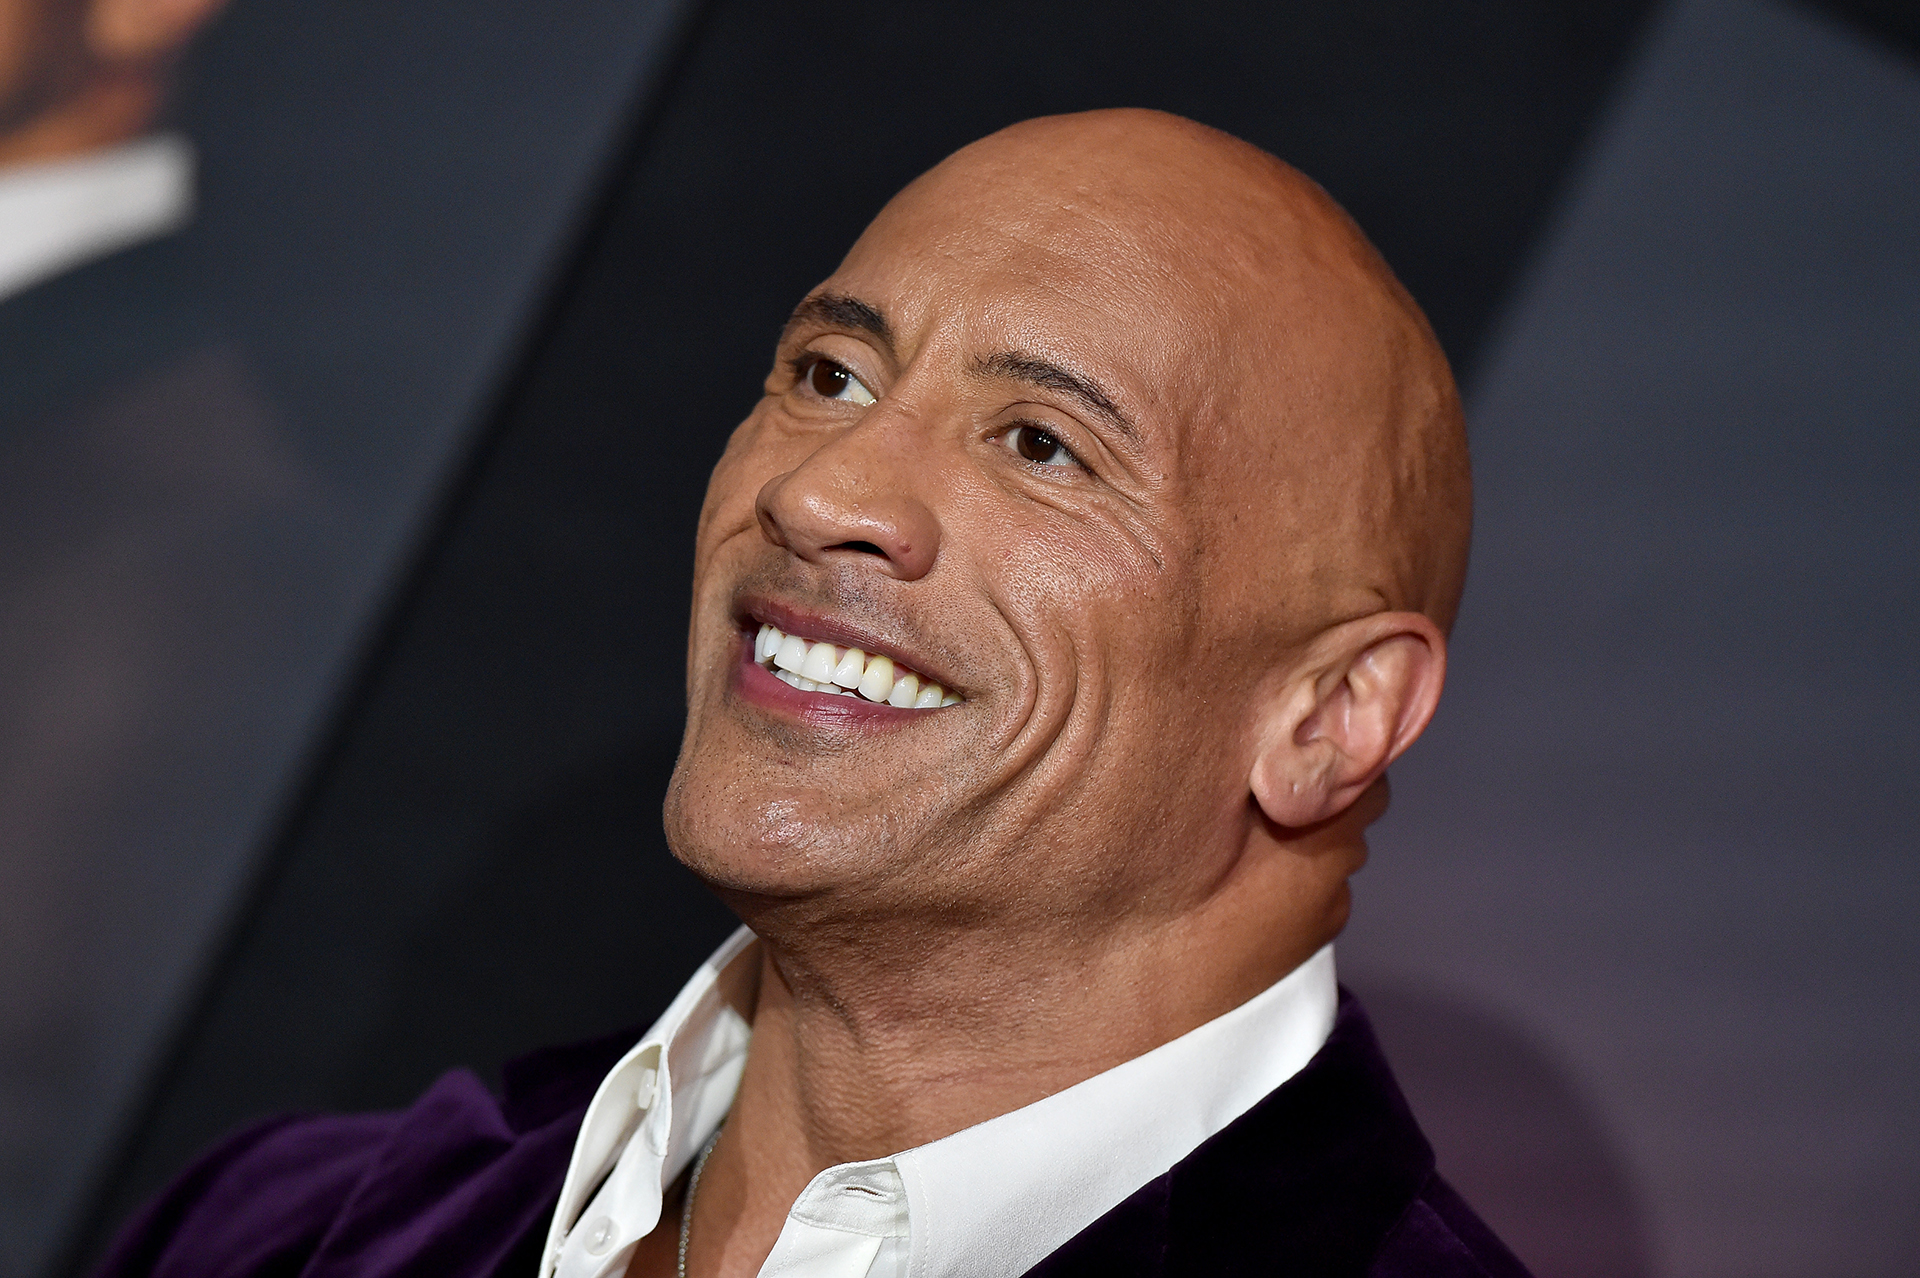 Every Dwayne the Rock Johnson Movie Ranked From Worst to Best